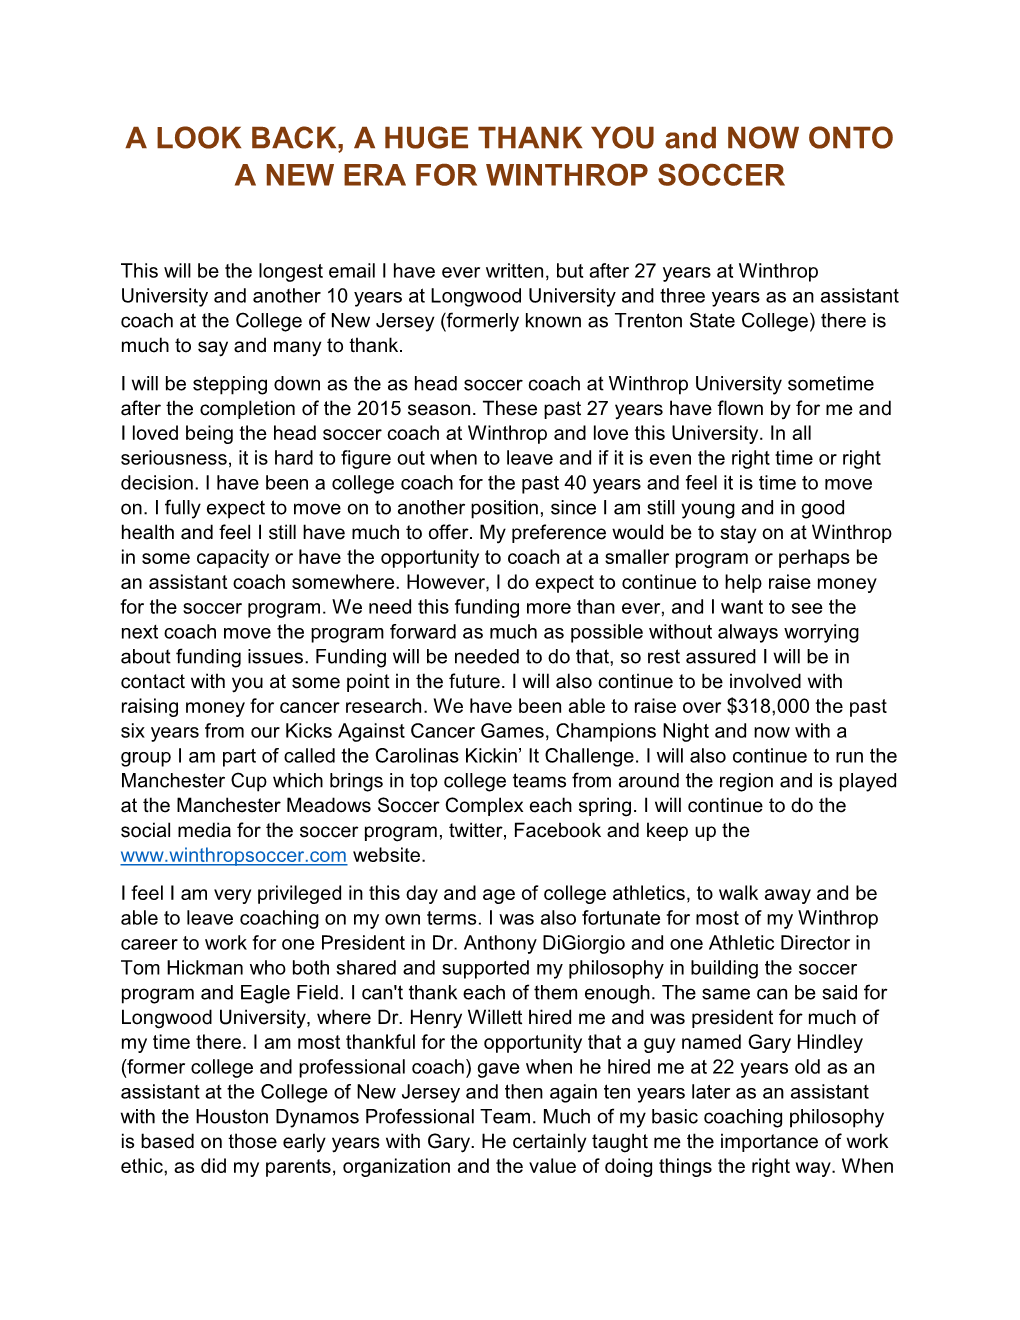 A LOOK BACK, a HUGE THANK YOU and NOW ONTO a NEW ERA for WINTHROP SOCCER